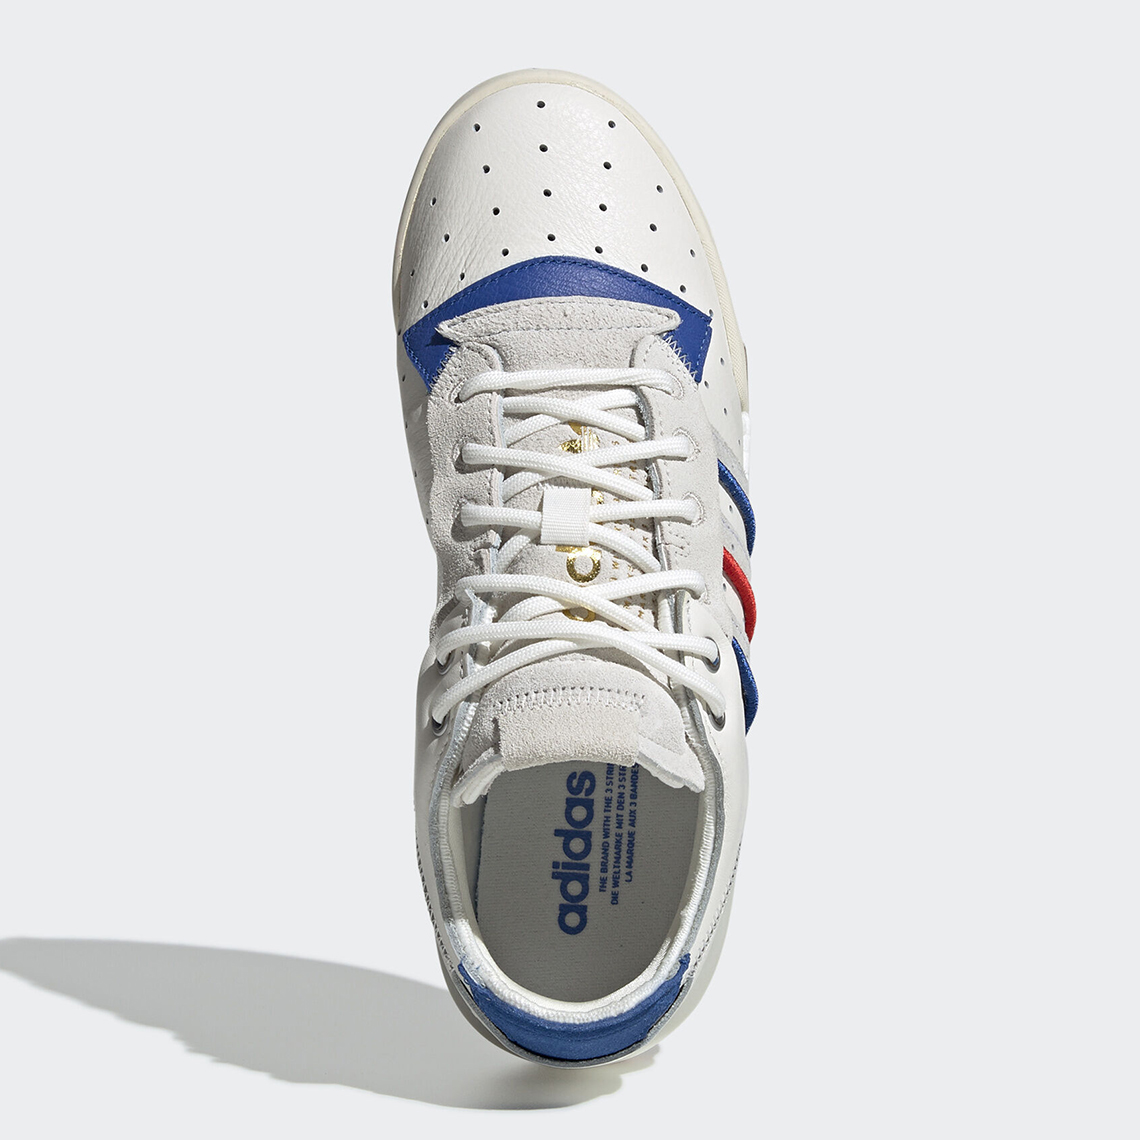 Adidas Rivalry Rm Tricolore Ee4986 5